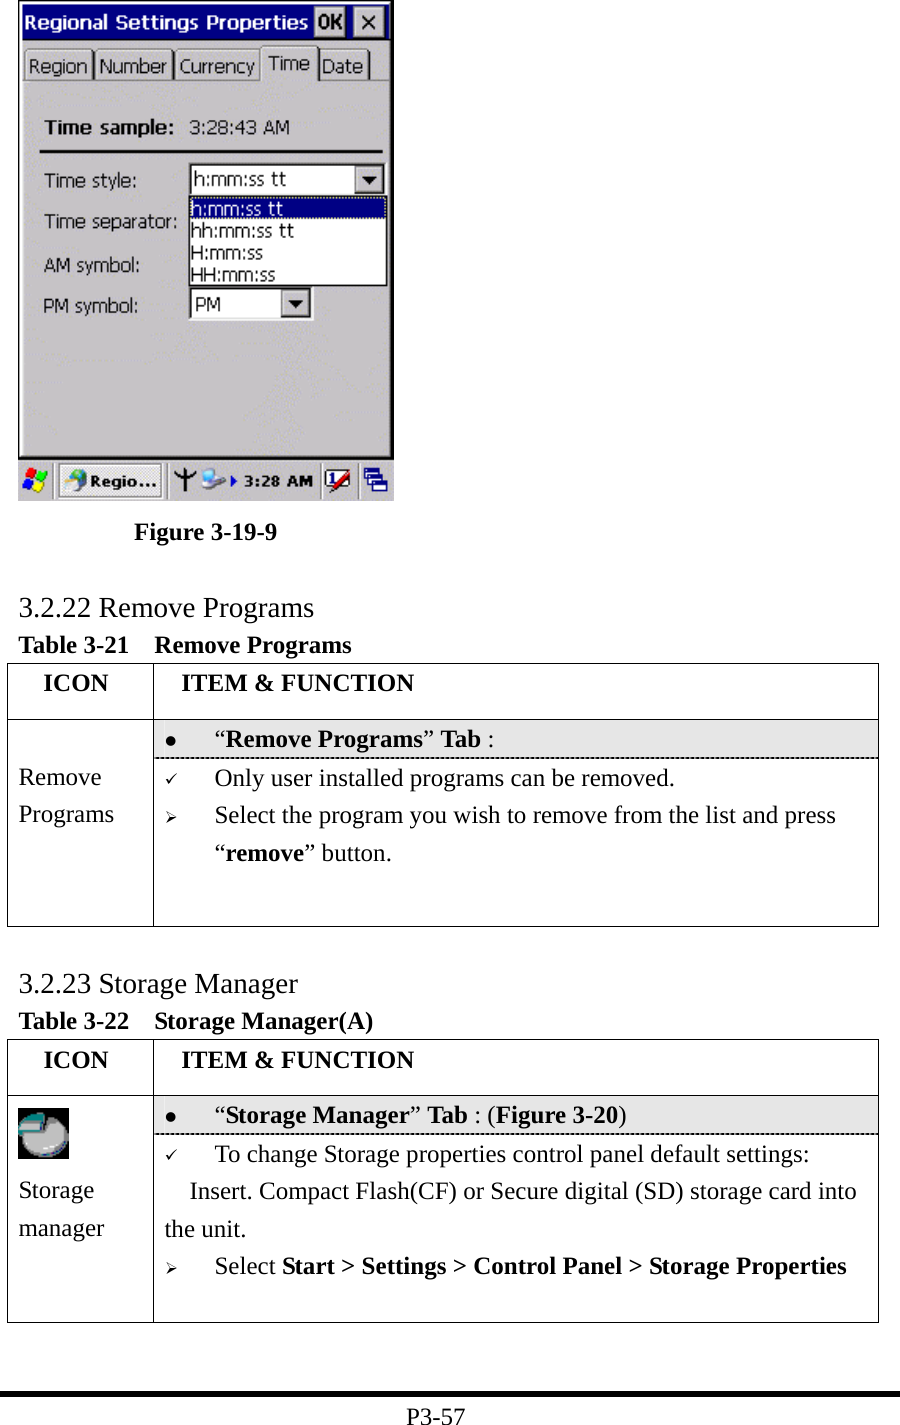   Figure 3-19-9  3.2.22 Remove Programs Table 3-21  Remove Programs   ICON   ITEM &amp; FUNCTION   “Remove Programs” Tab :    Remove Programs   Only user installed programs can be removed.   Select the program you wish to remove from the list and press “remove” button.  3.2.23 Storage Manager Table 3-22  Storage Manager(A)   ICON   ITEM &amp; FUNCTION   “Storage Manager” Tab : (Figure 3-20)  Storage manager   To change Storage properties control panel default settings: Insert. Compact Flash(CF) or Secure digital (SD) storage card into the unit.   Select Start &gt; Settings &gt; Control Panel &gt; Storage Properties    P3-57 